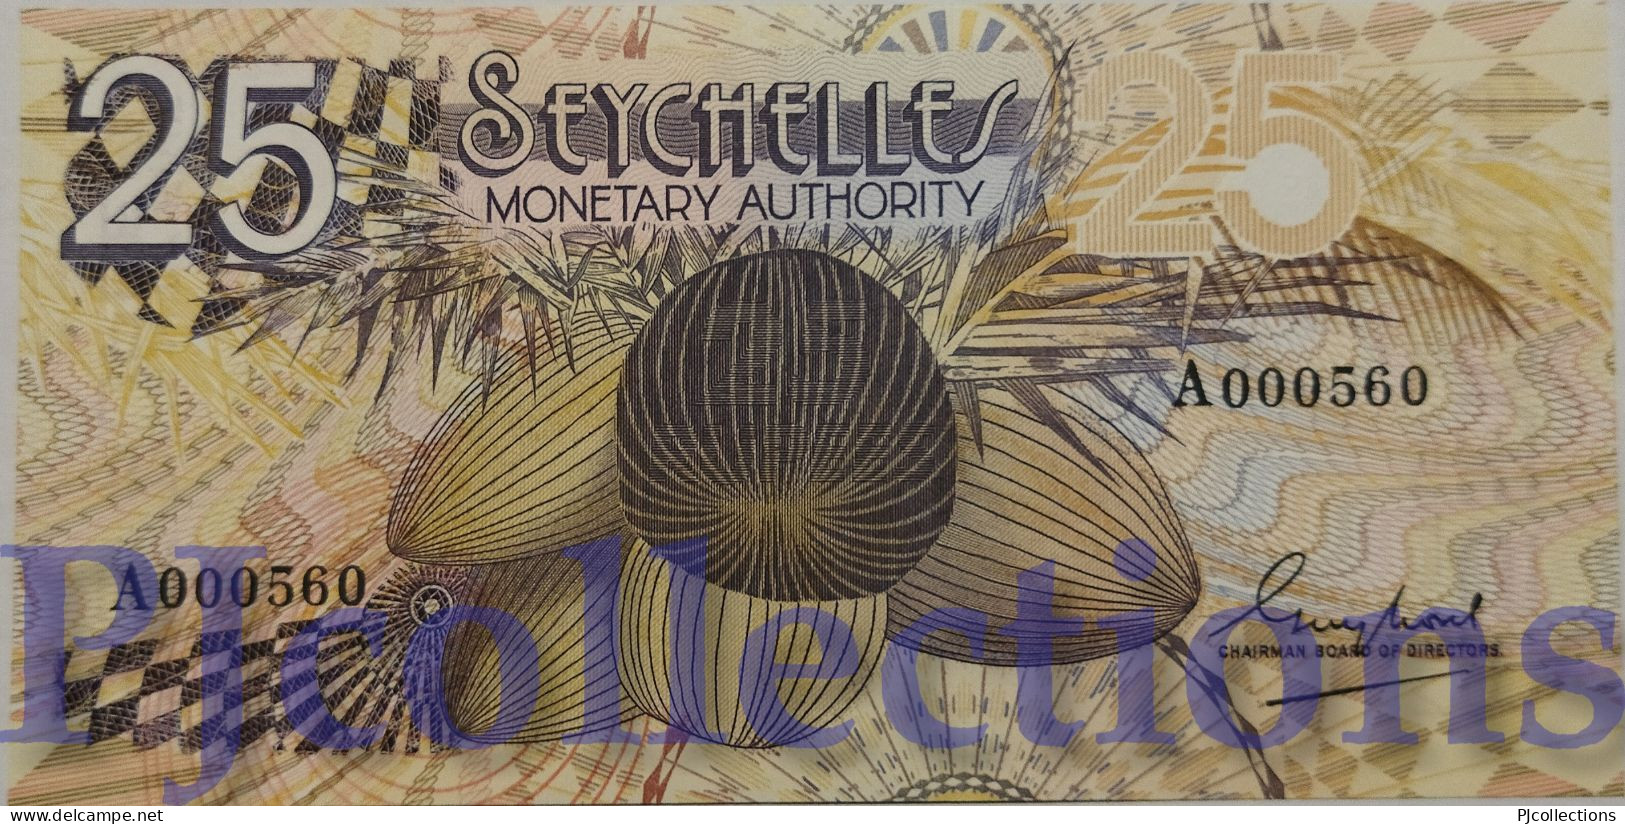 SEYCHELLES 25 RUPEES 1979 PICK 24a UNC LOW SERIAL NUMBER "A 000560" - Seychellen